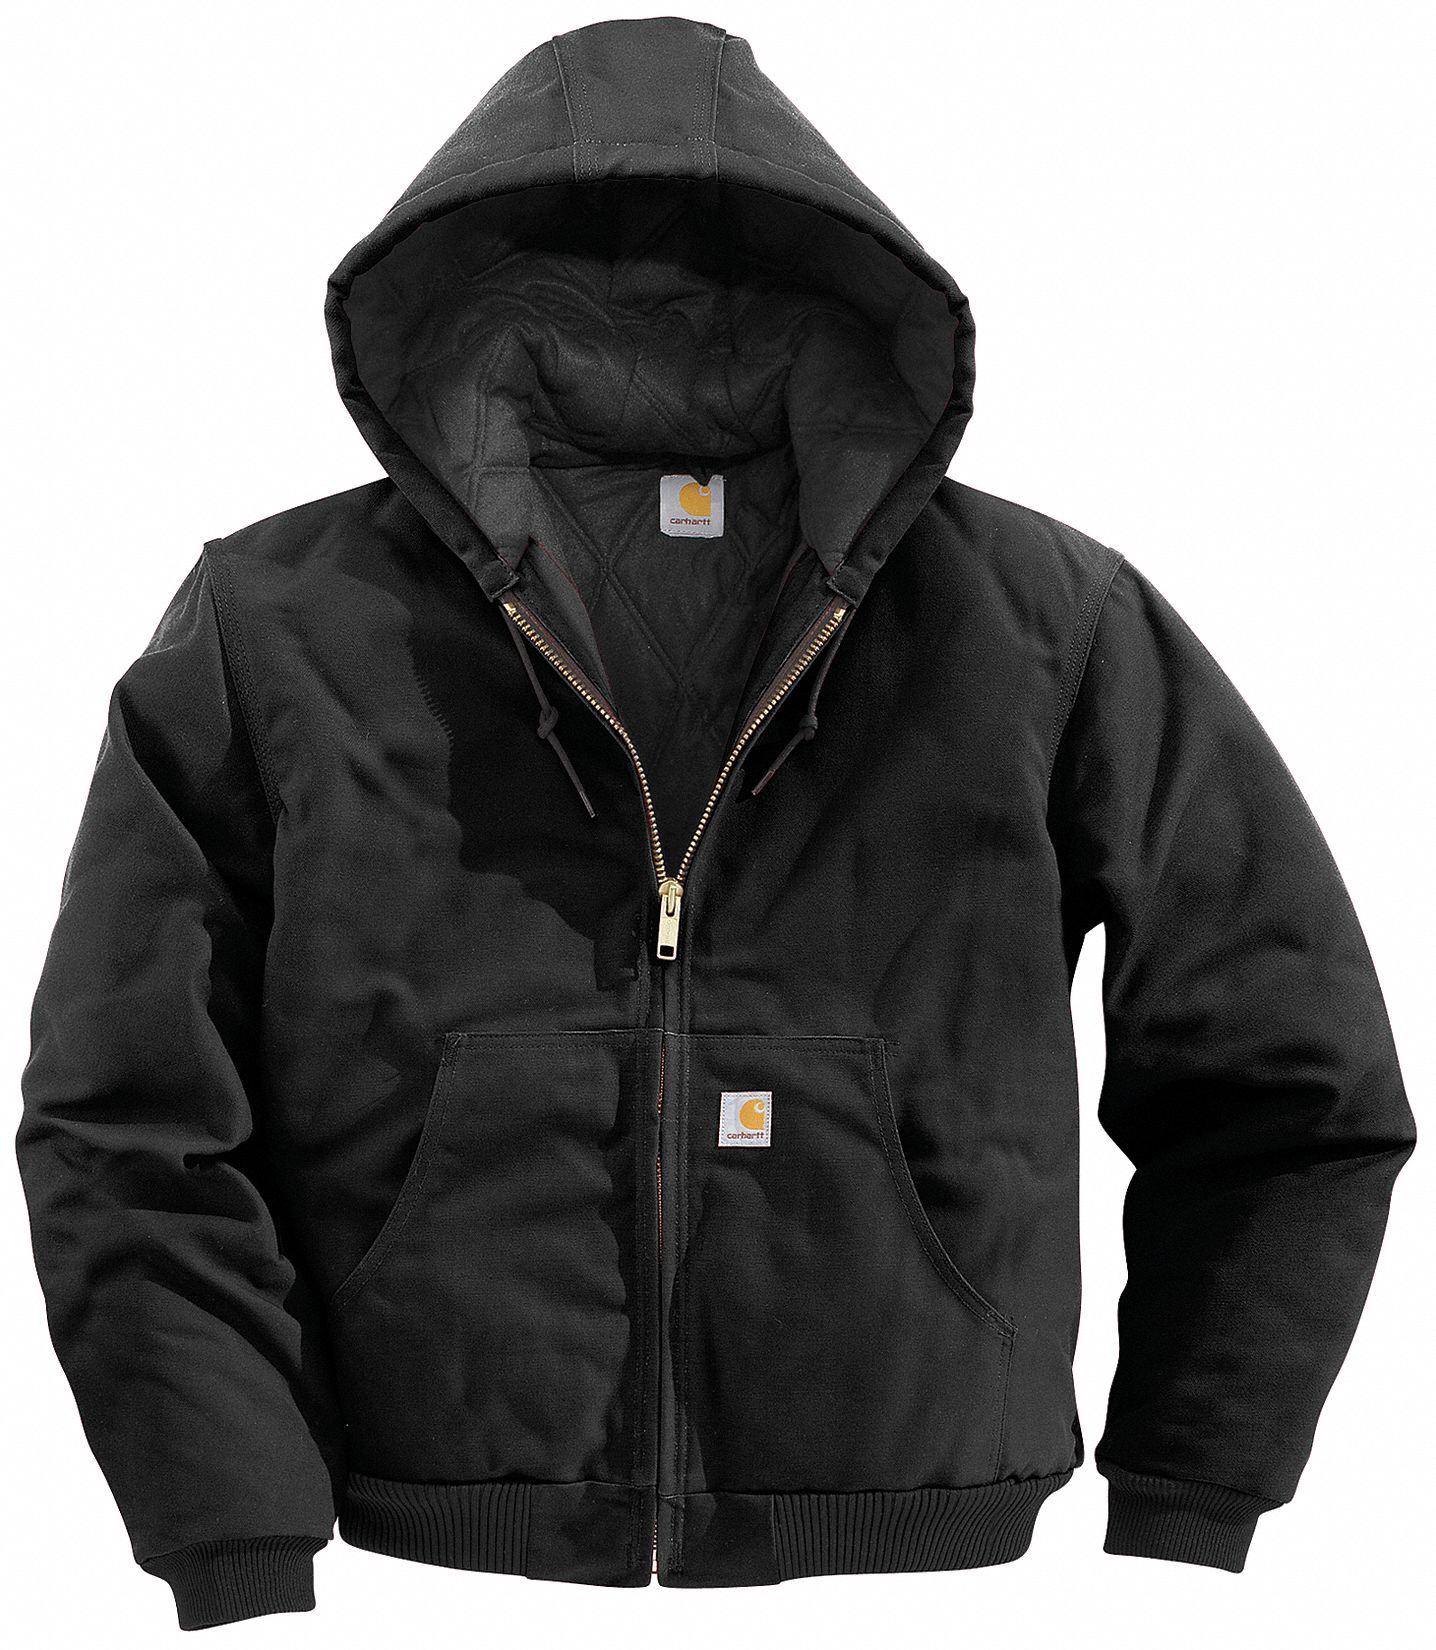  Carhartt Jackets Hooded Lined Jacket J131BLK - Black - 2X Large  Tall: Health And Personal Care: Clothing, Shoes & Jewelry